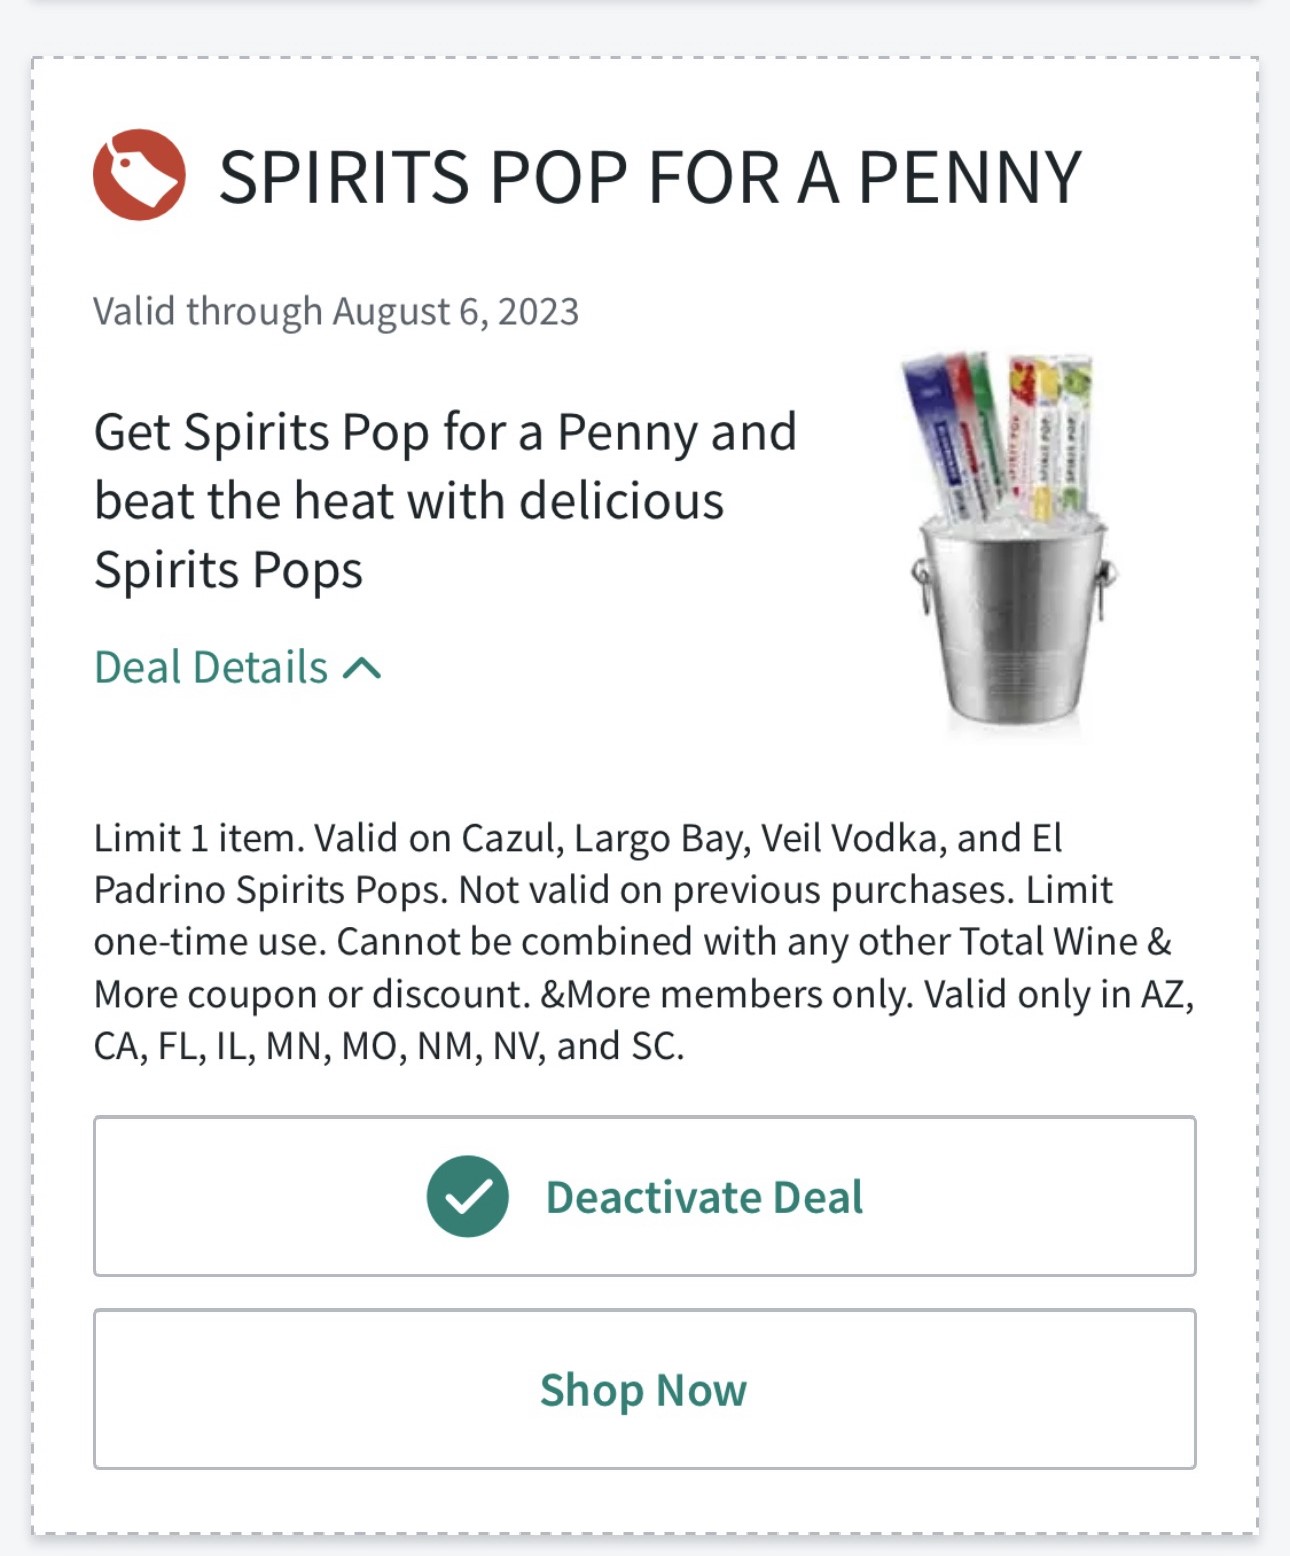 Total Wine, select states 12 pack of Spirits Pops for a penny, YMMV - $.01